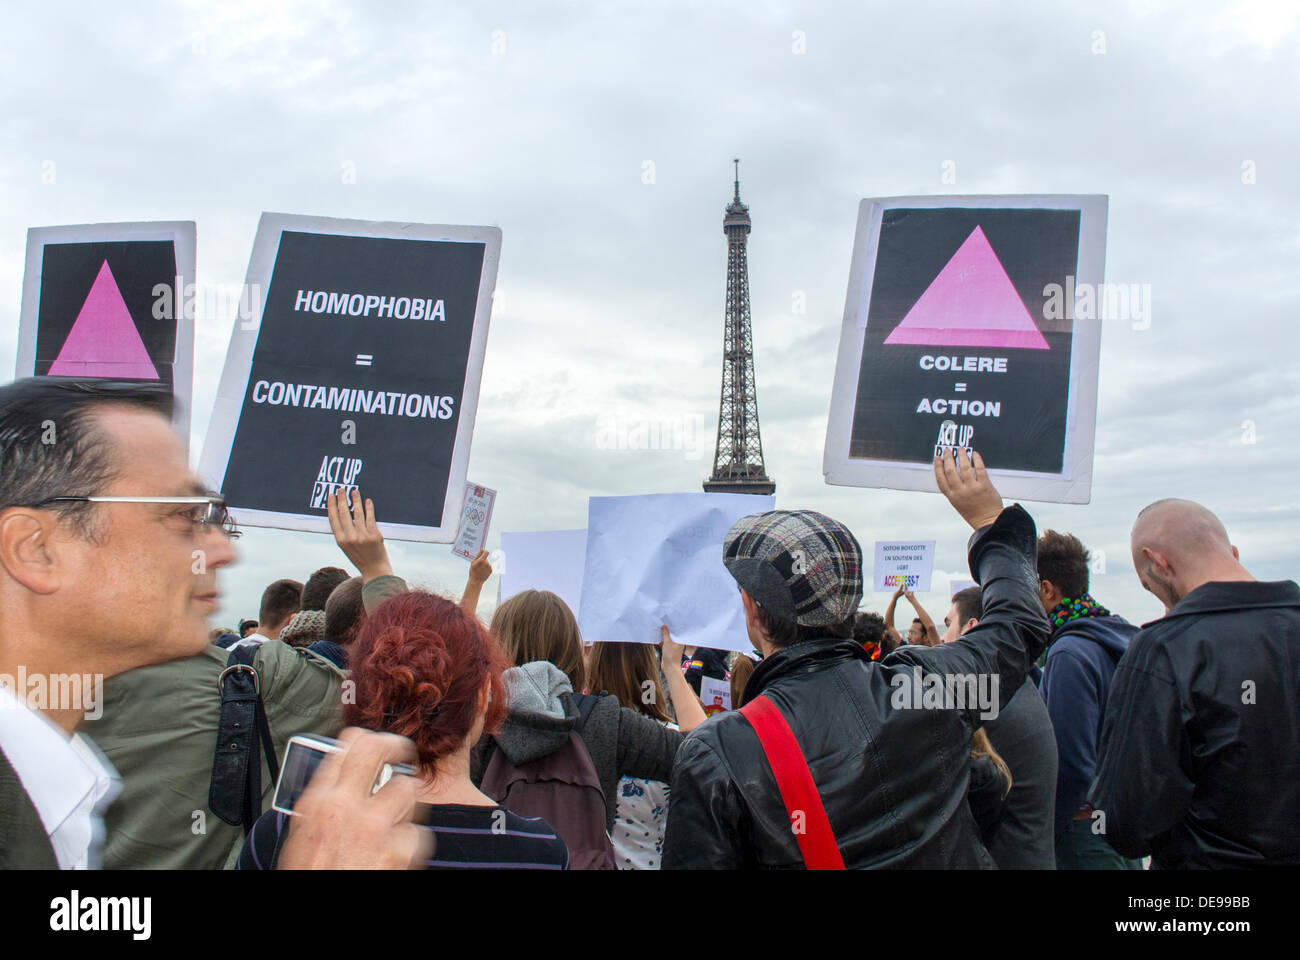 Paris, France. Several LGBT Groups (Act Up-Paris) held an Anti-Homophobia Law, in Russia, Demonstration, at Rights of Man Plaza, French protest hiv gay act up poster, gay men problem Stock Photo